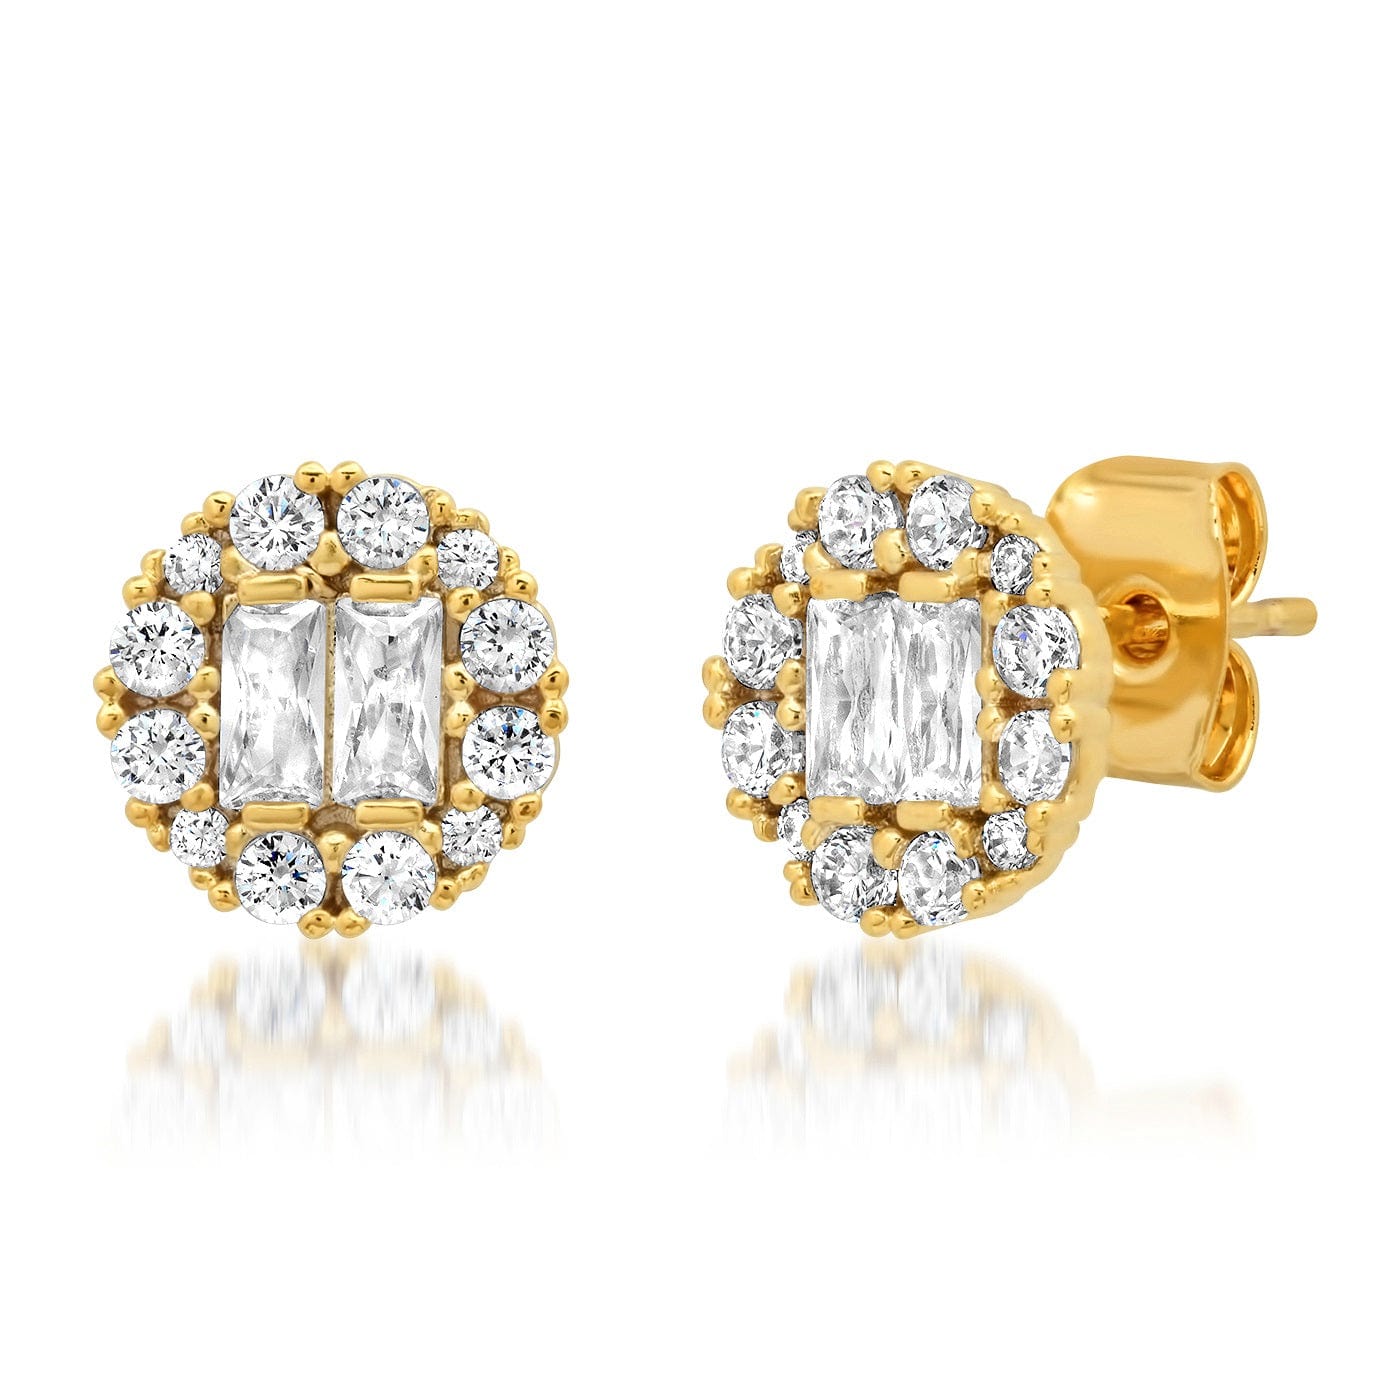 TAI JEWELRY Earrings Circular Cz Stud With Round And Baguette Stones